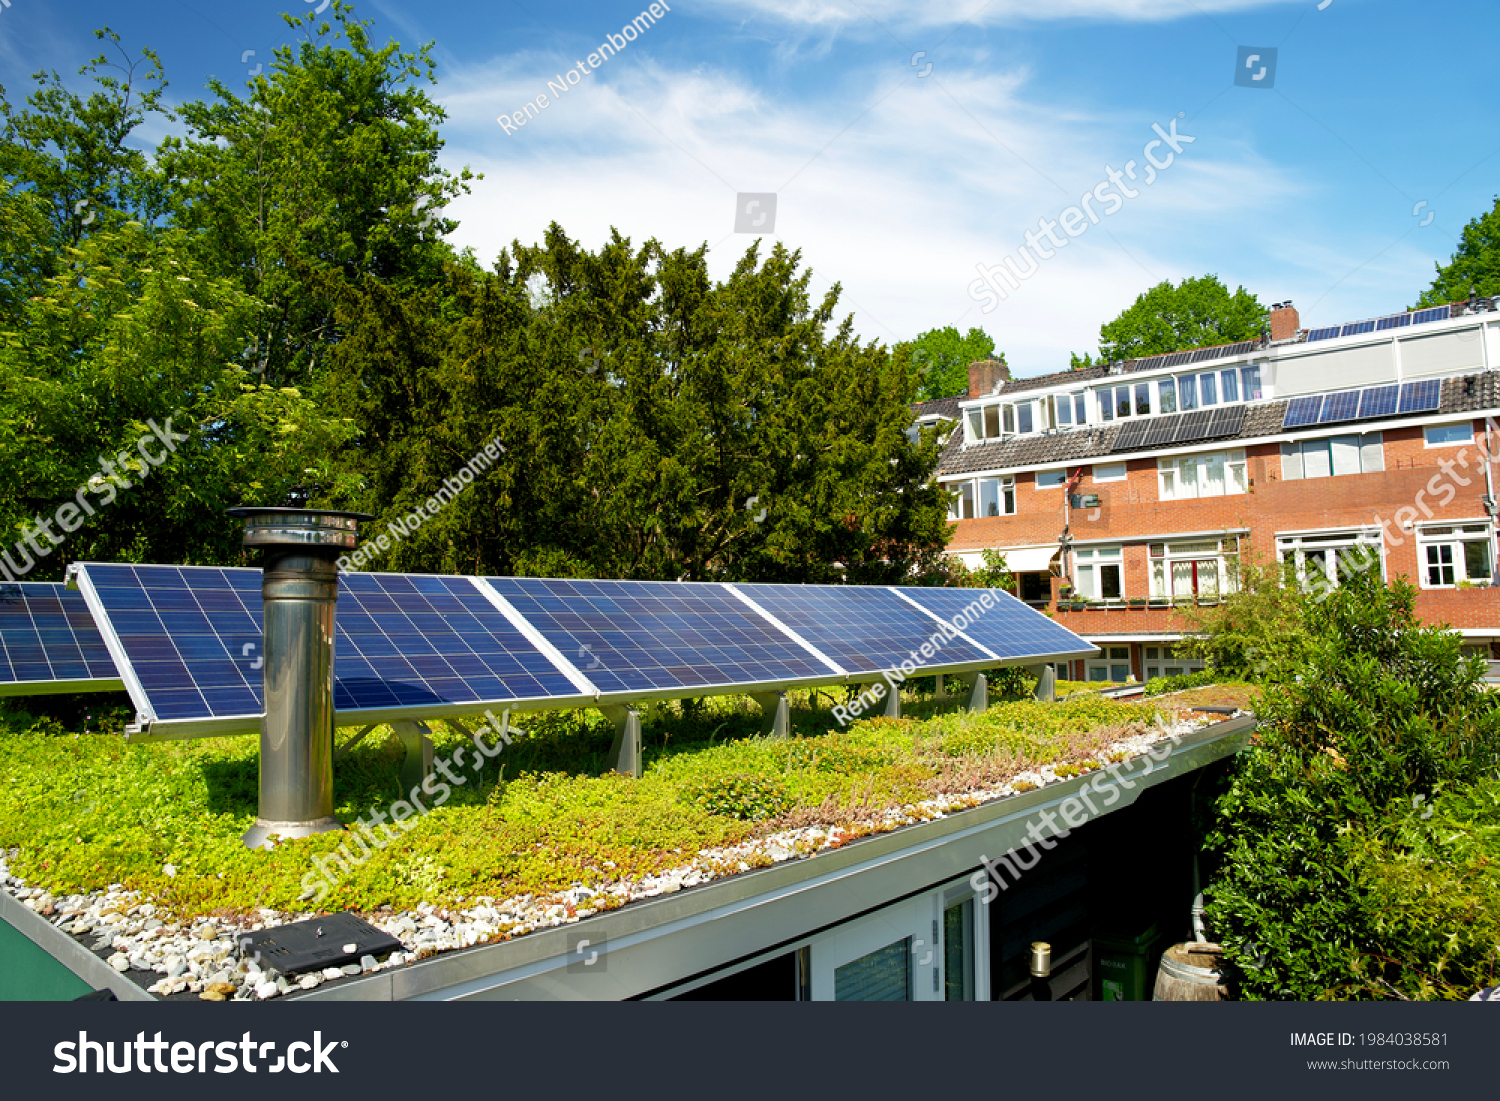 Solar panels on a green roof with flowering sedum plants #1984038581